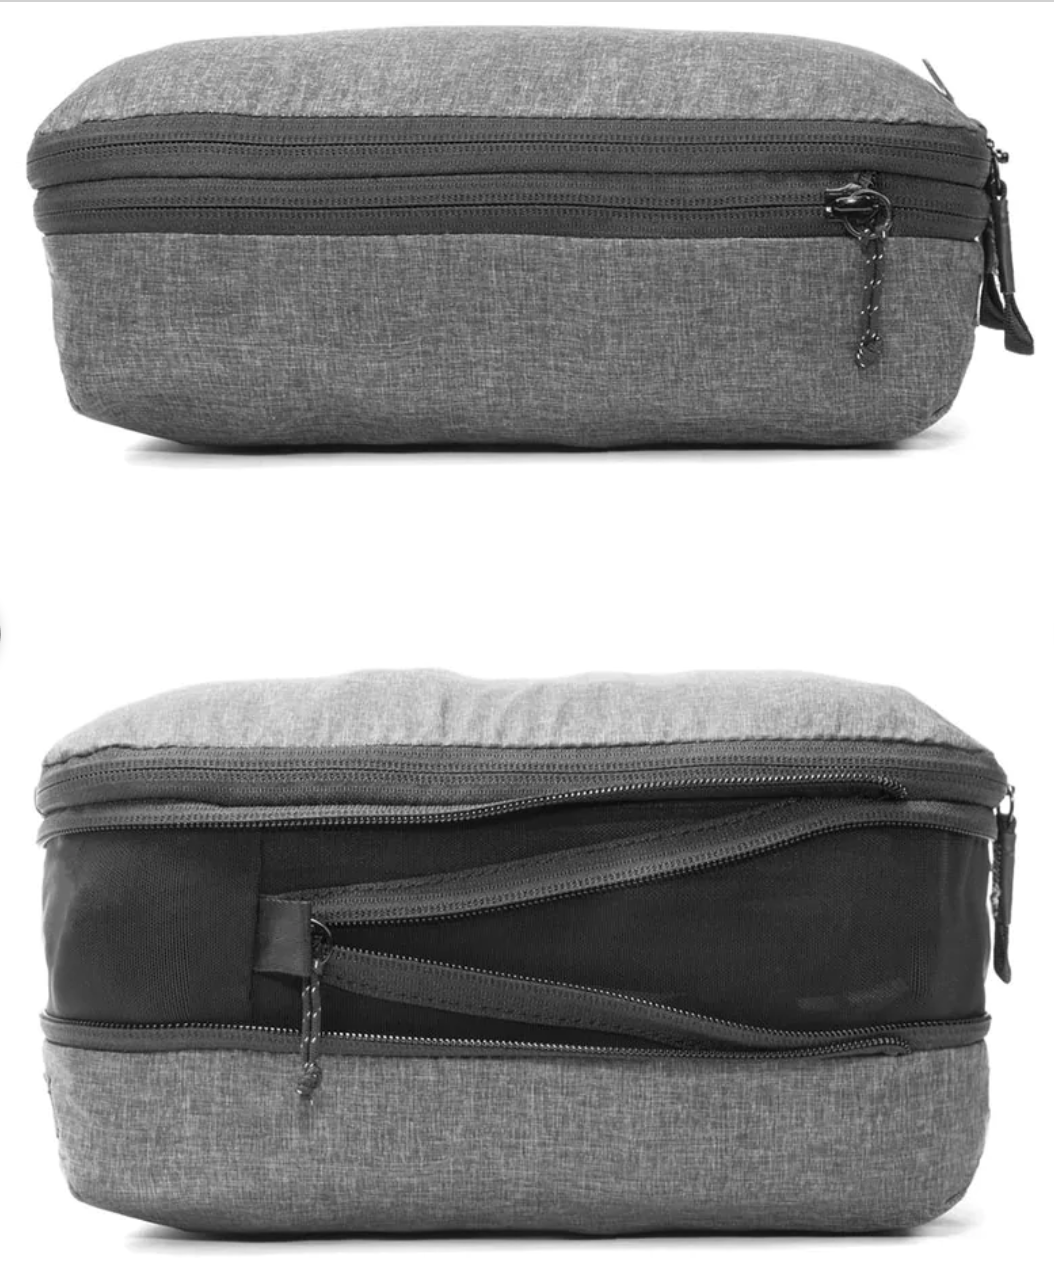 Packing Cubes by Peak Design